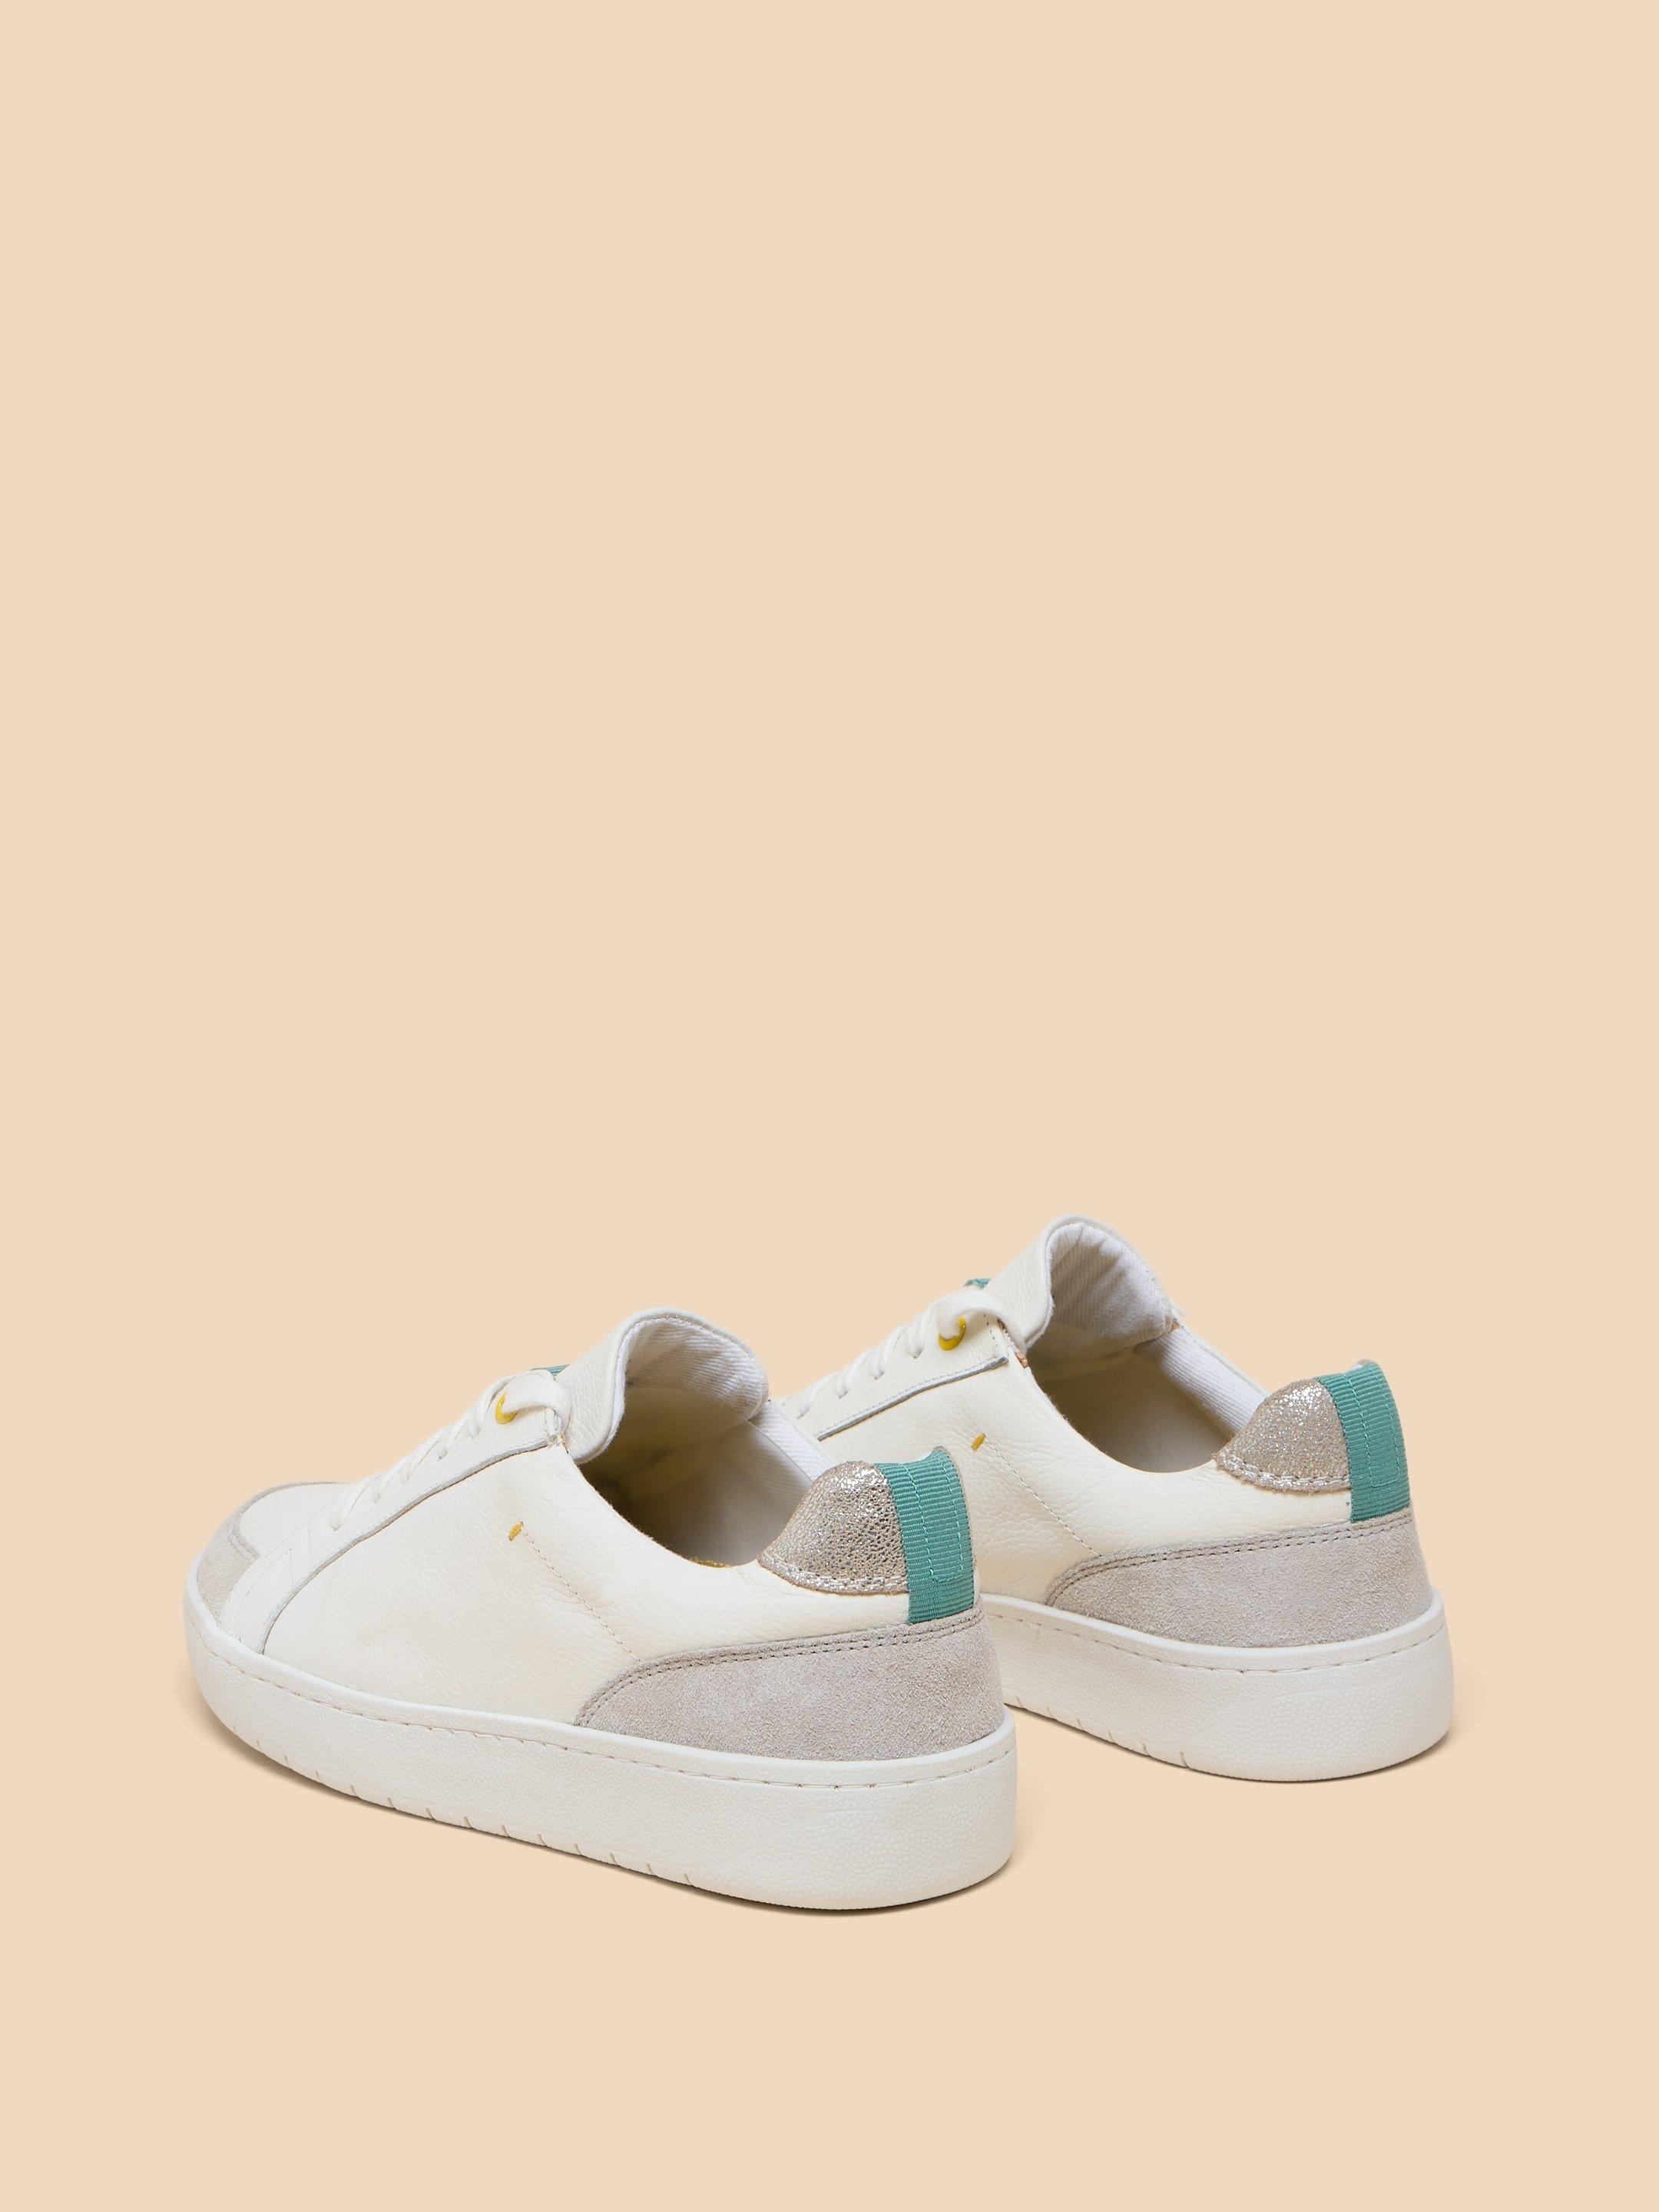 Lily Leather Suede Trainer in WHITE MLT - FLAT BACK